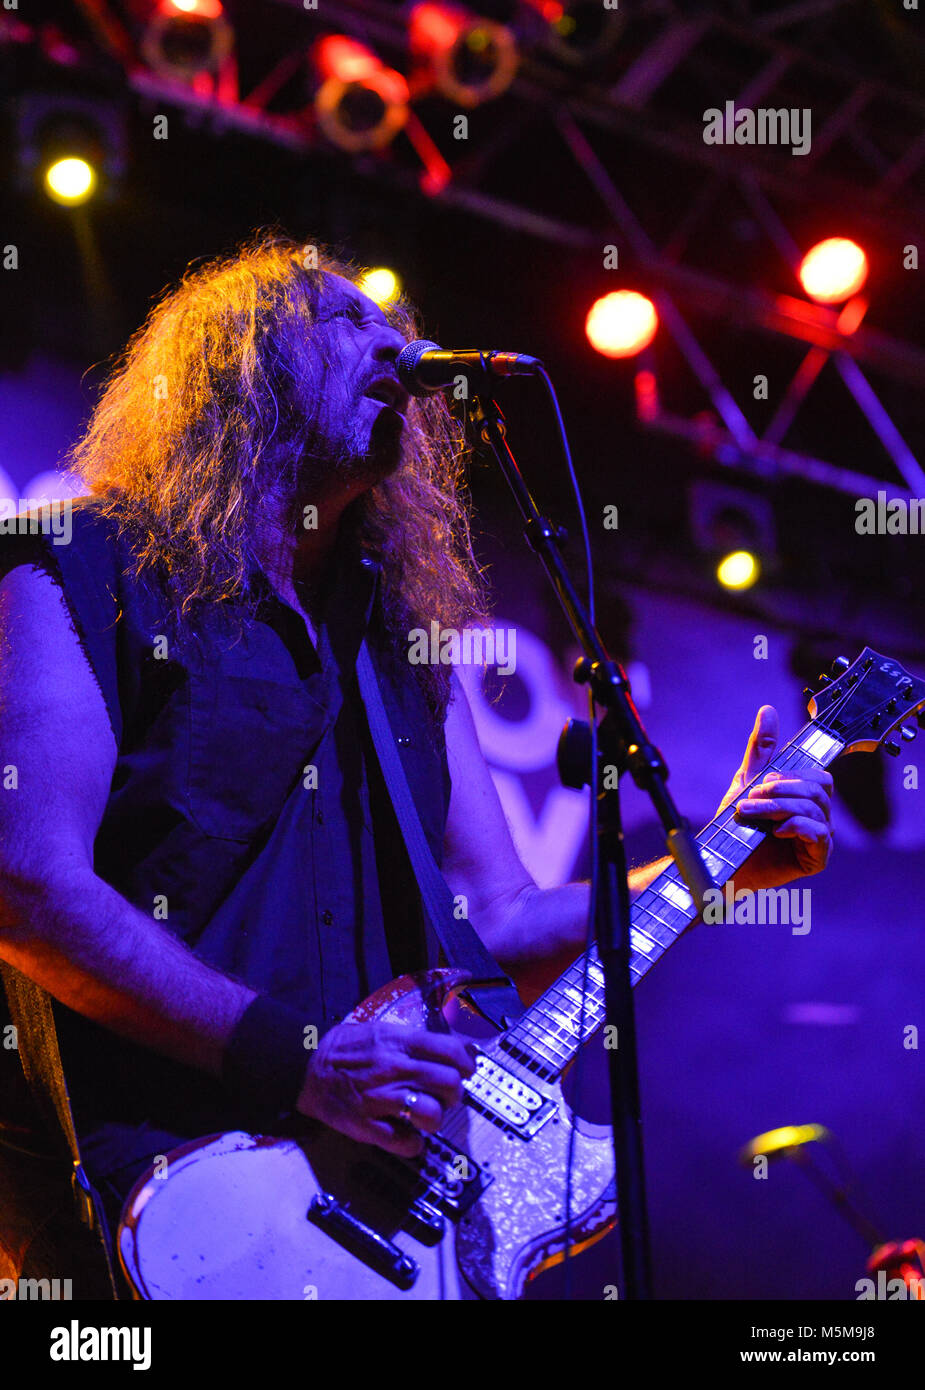 Las Vegas, Nevada, February 23, 2018 - Woodroe 'Woody' Weatherman the lead guitarist for the heavy metal band Corrosion of Conformity House of Blues in Las Vegas, NV - Photo Credit: Ken Howard Images Credit: Ken Howard/Alamy Live News Stock Photo